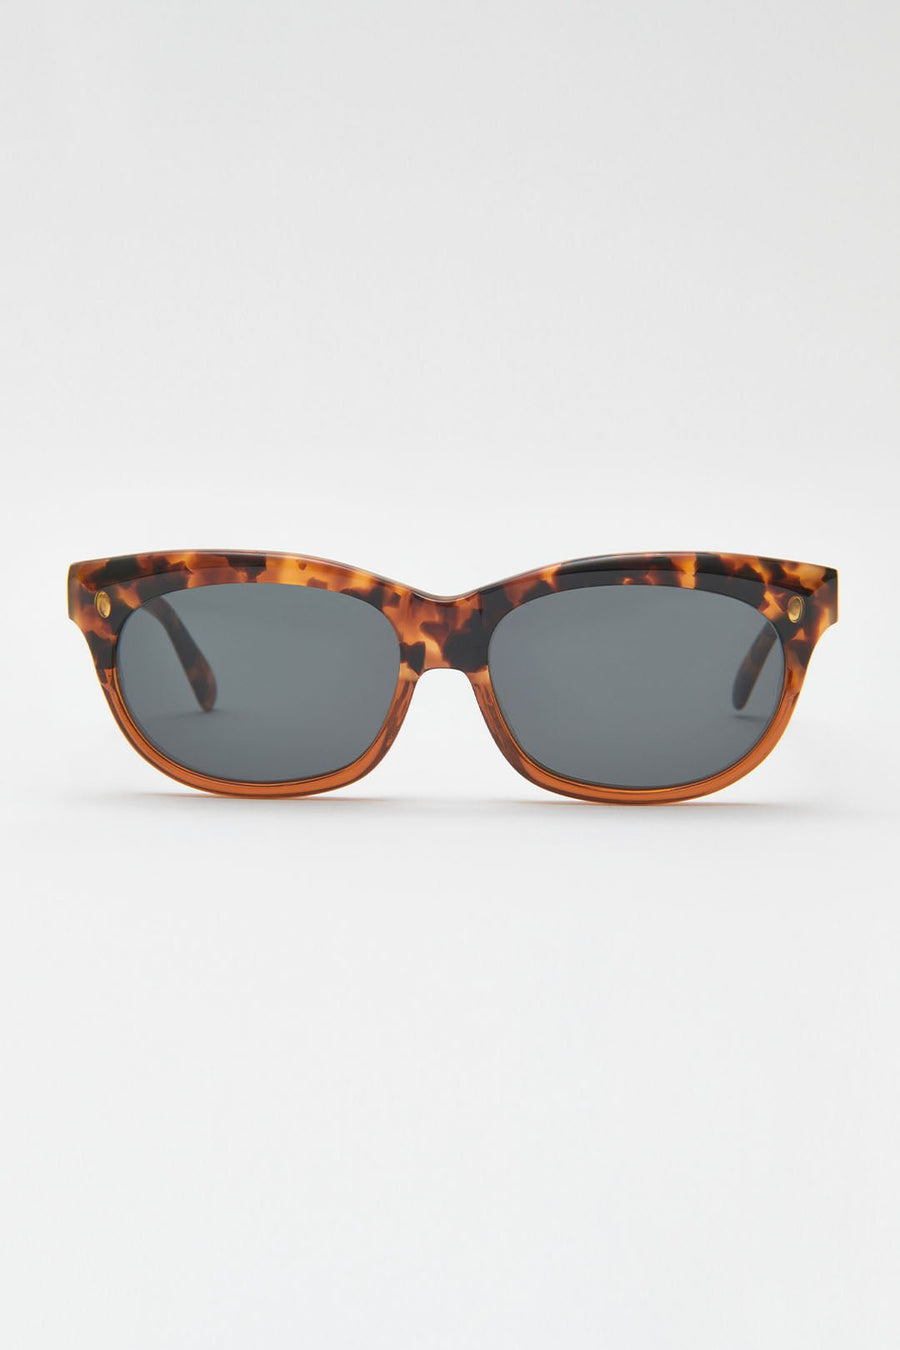 VINTAGE FACONNABLE SUNGLASSES, BROWN - Burning Torch Online Boutique